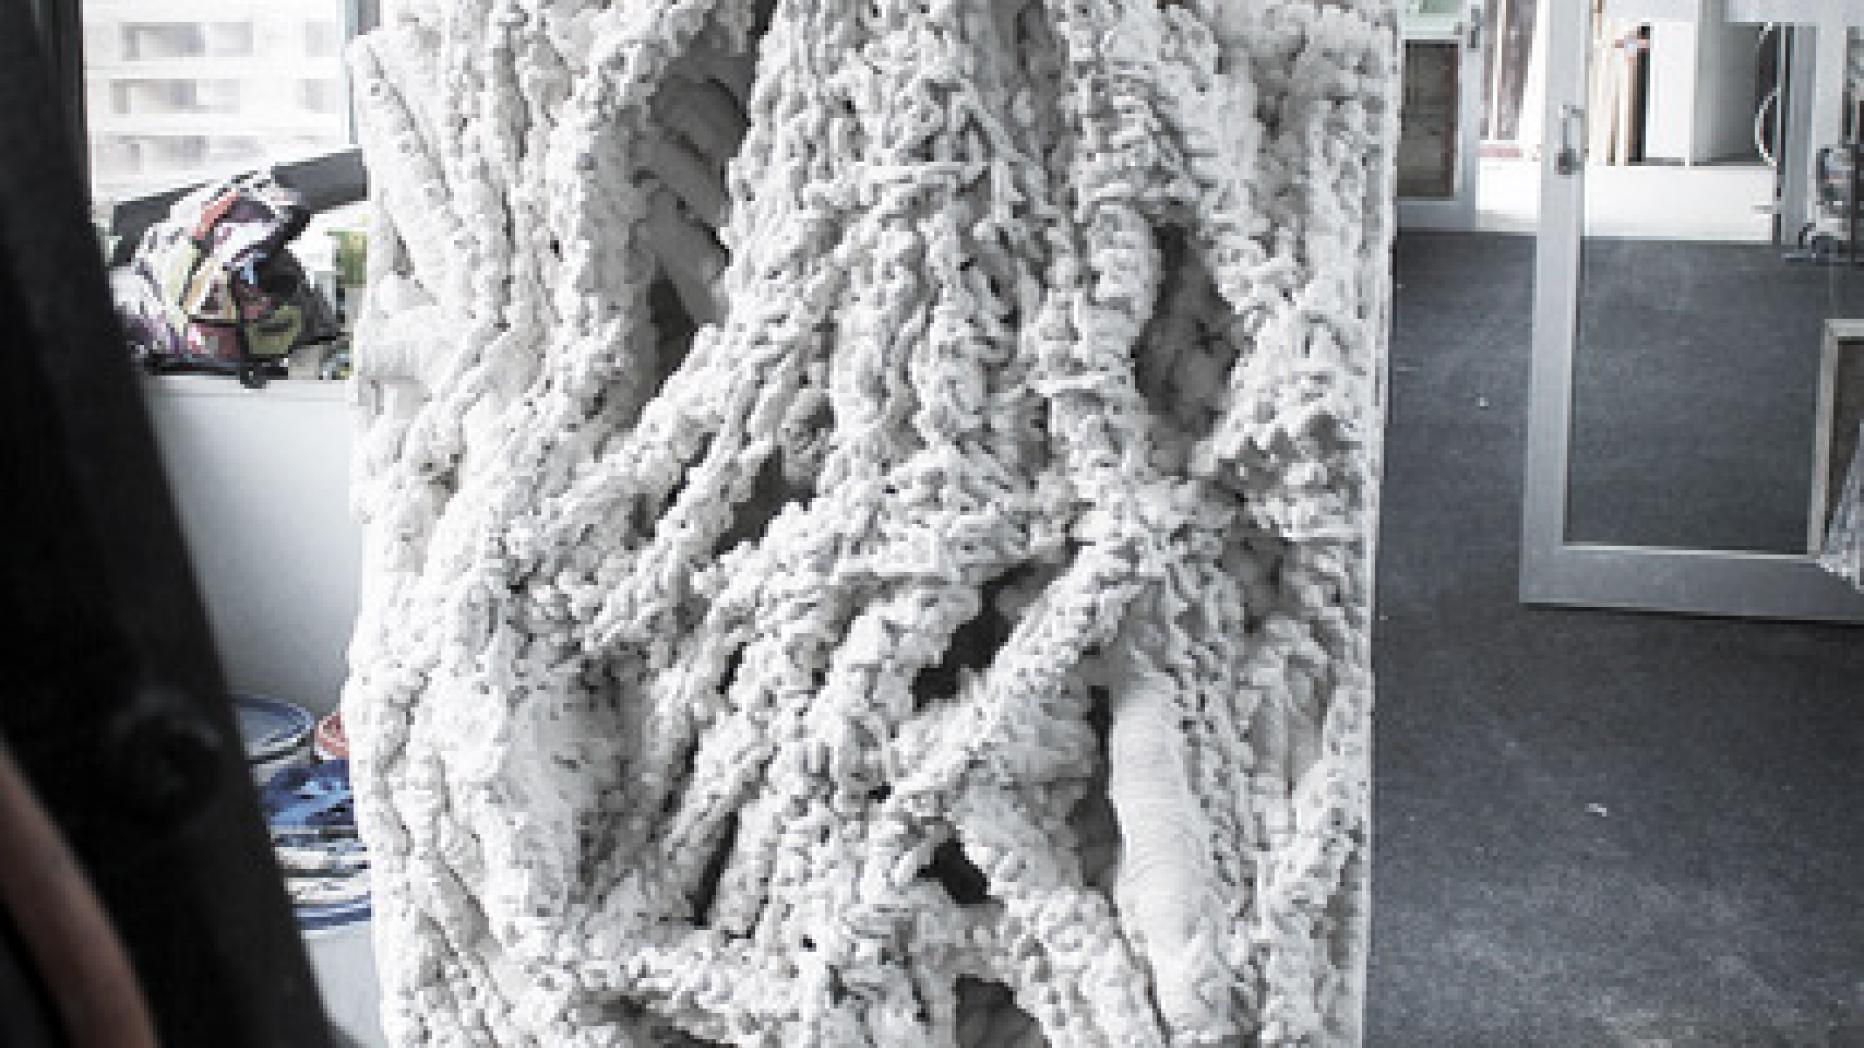 All white semi-organic looking sculpture that resembles a stalagmite or buildup of wet sand